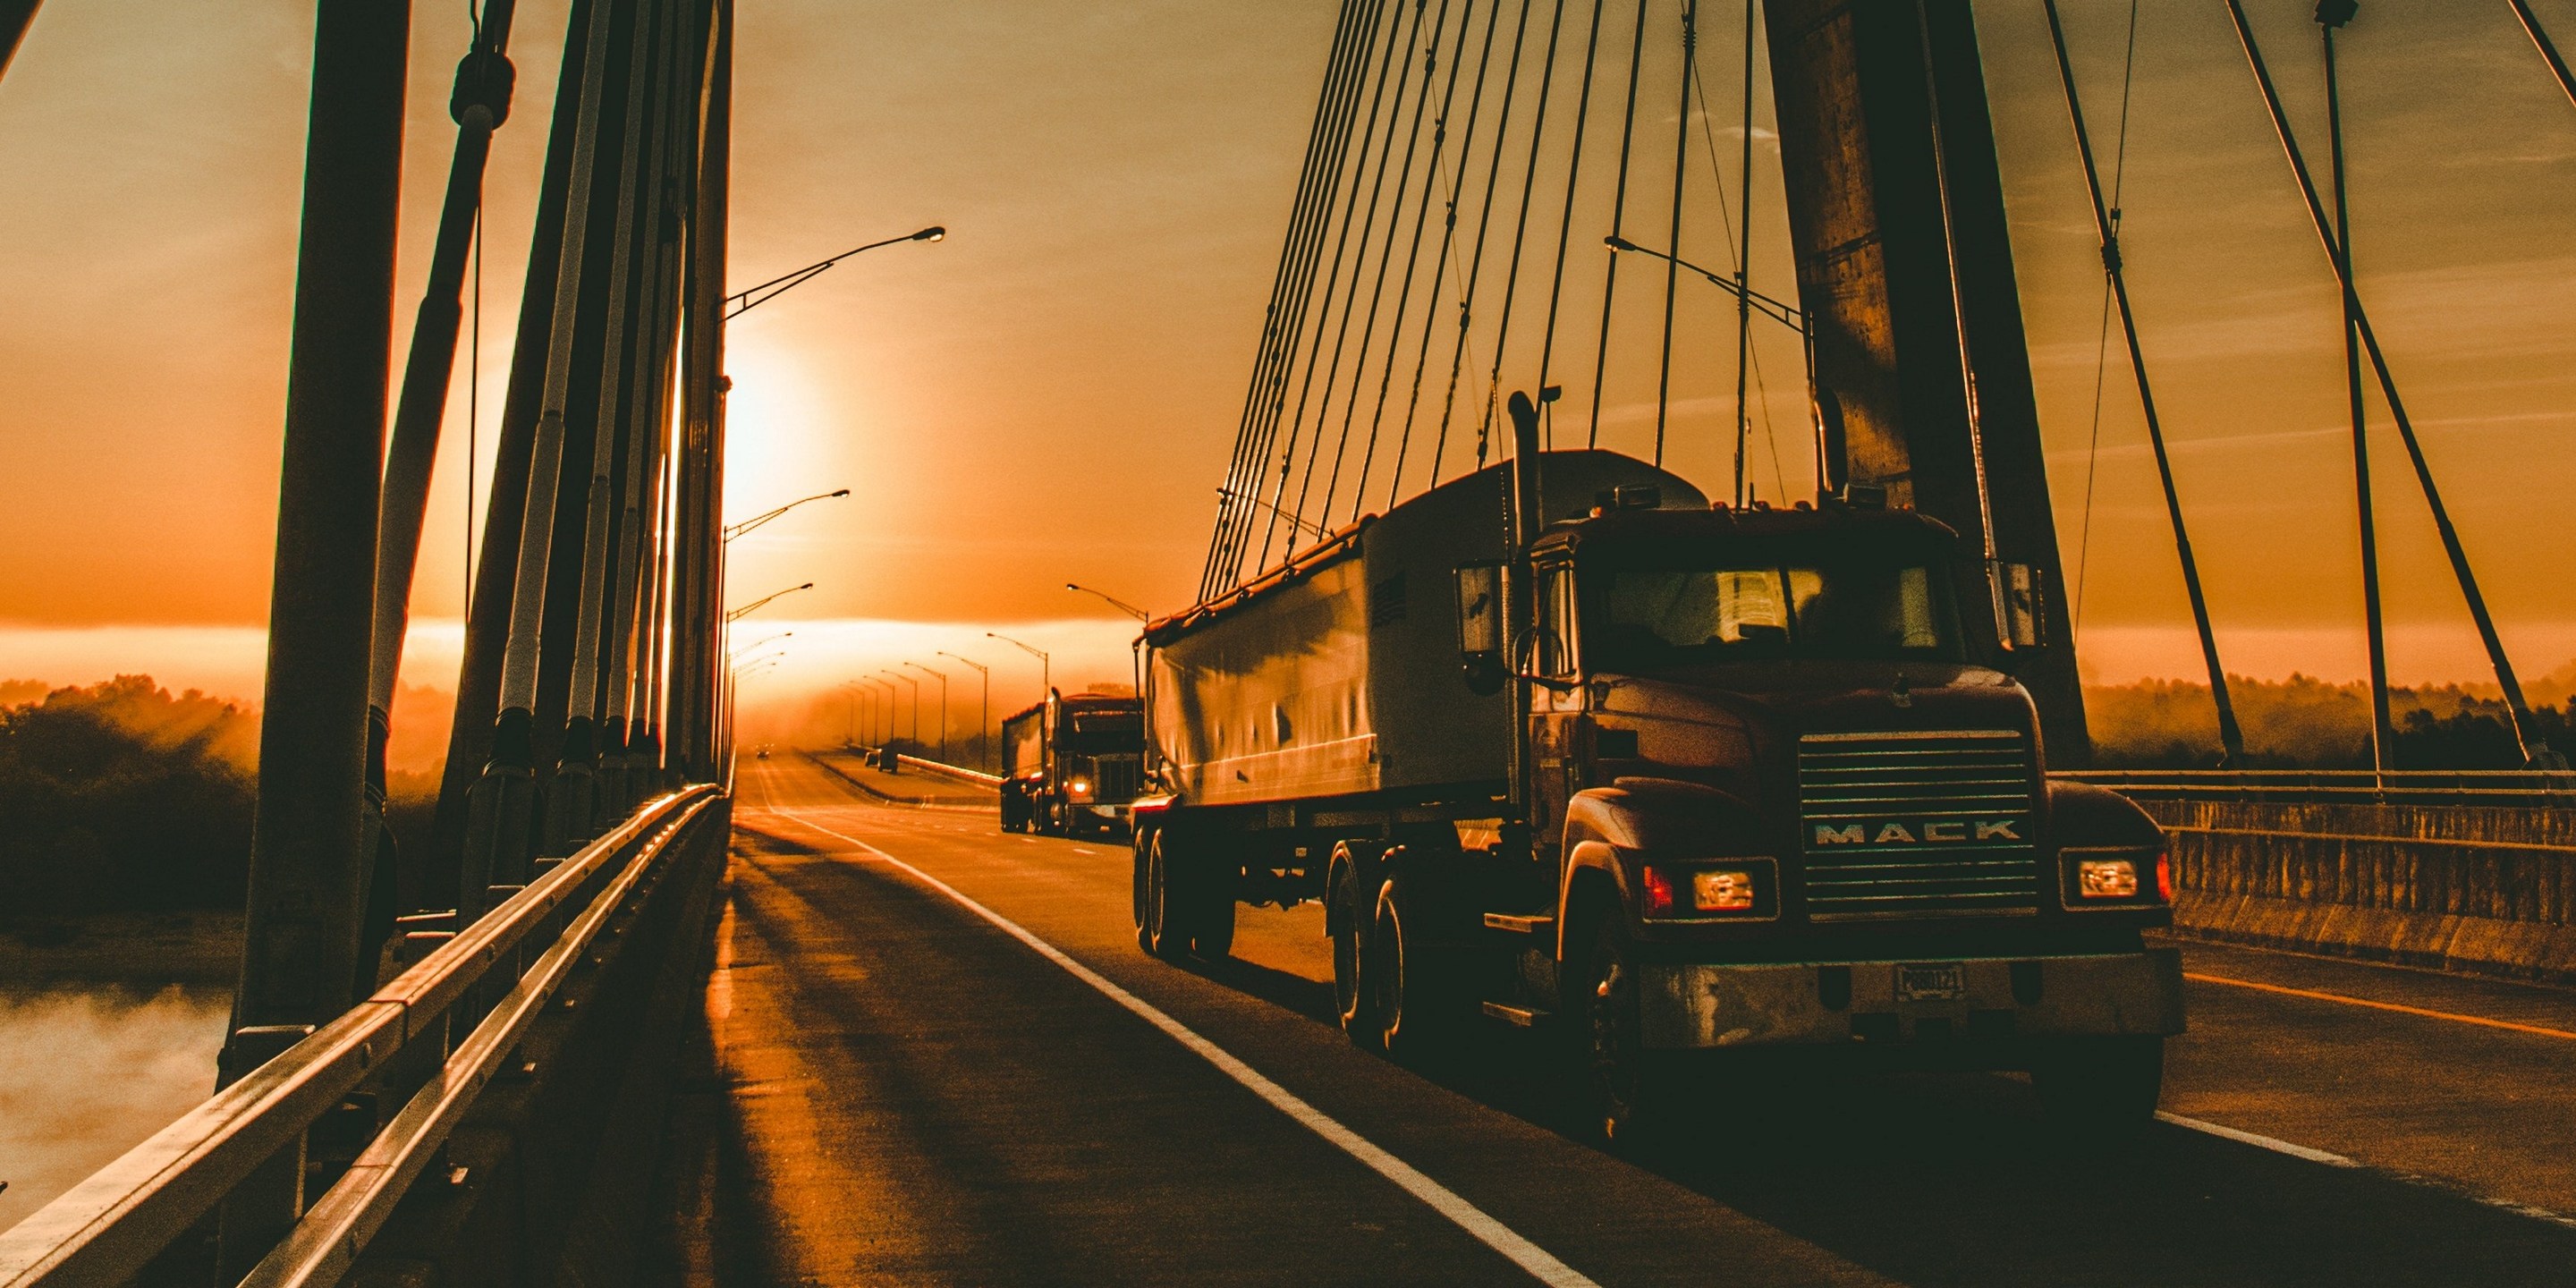 For independent trucking operators, the largest chunk of their insurance costs is liability coverage, which pays for injuries and property damage from a wreck. For over-the-road drivers, the Federal Motor Carrier Safety Administration (FMCSA) requires